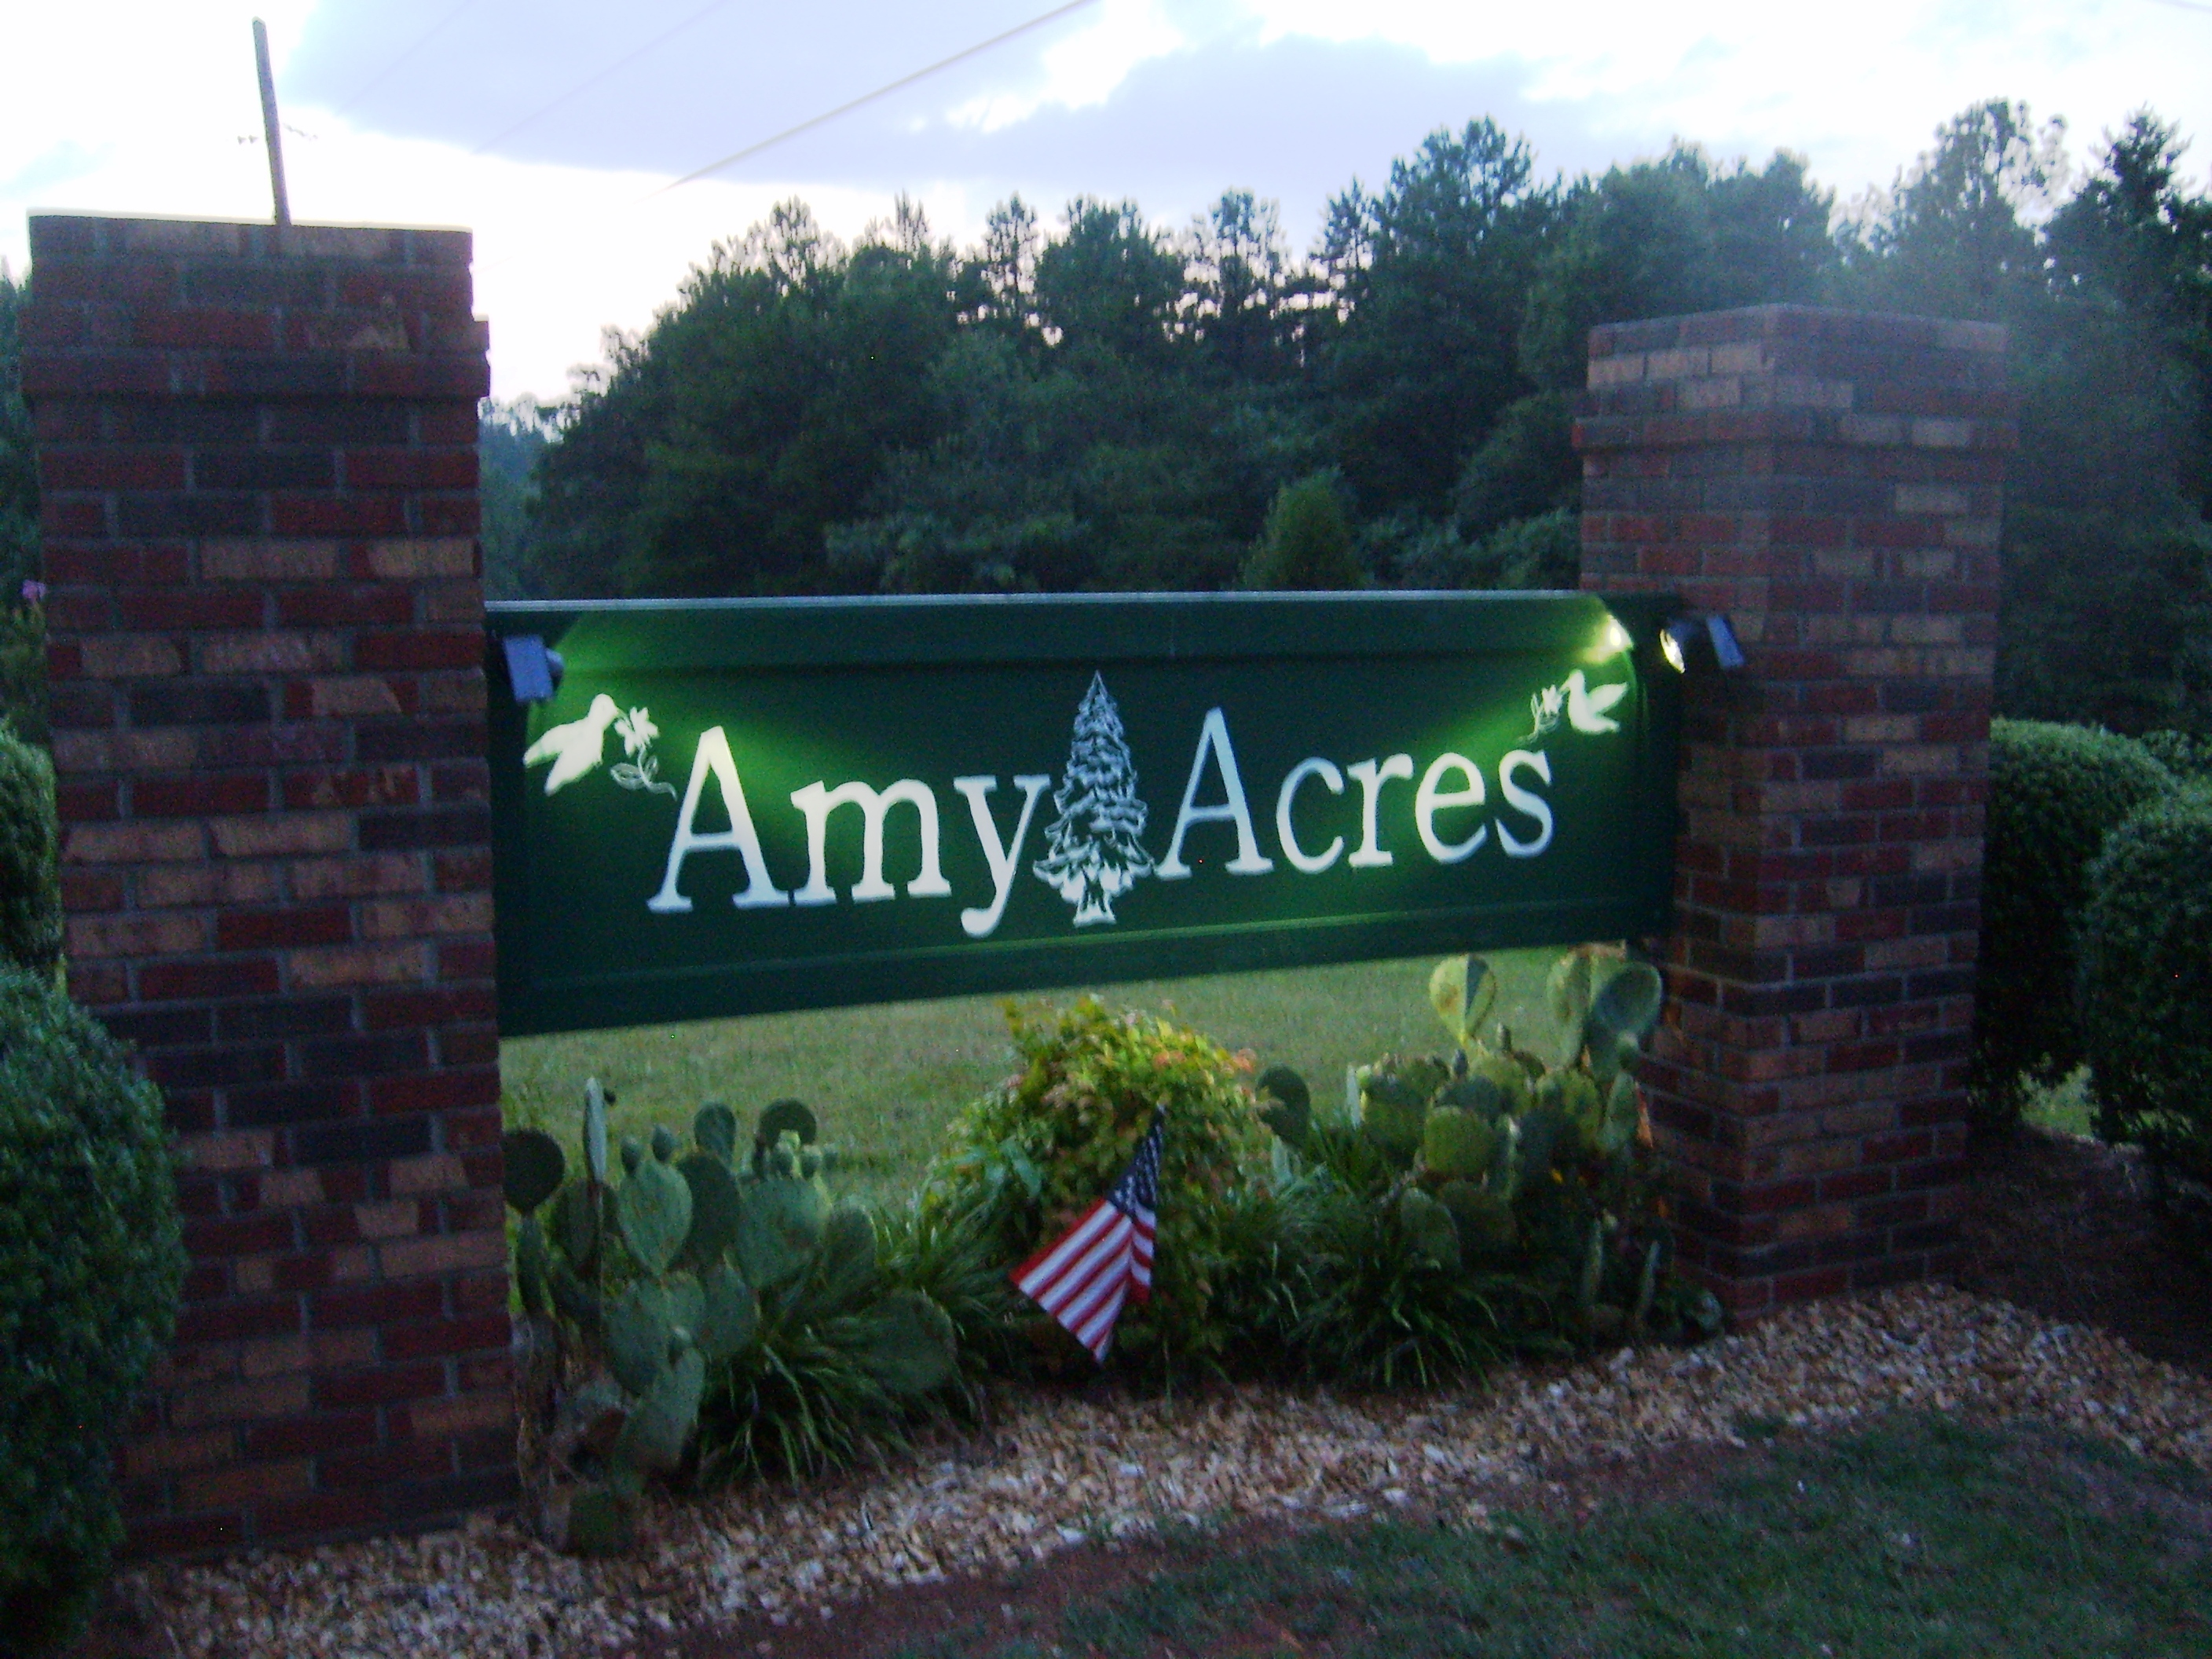 New Lighted Sign for Amy Acres Subdivision in Gastonia